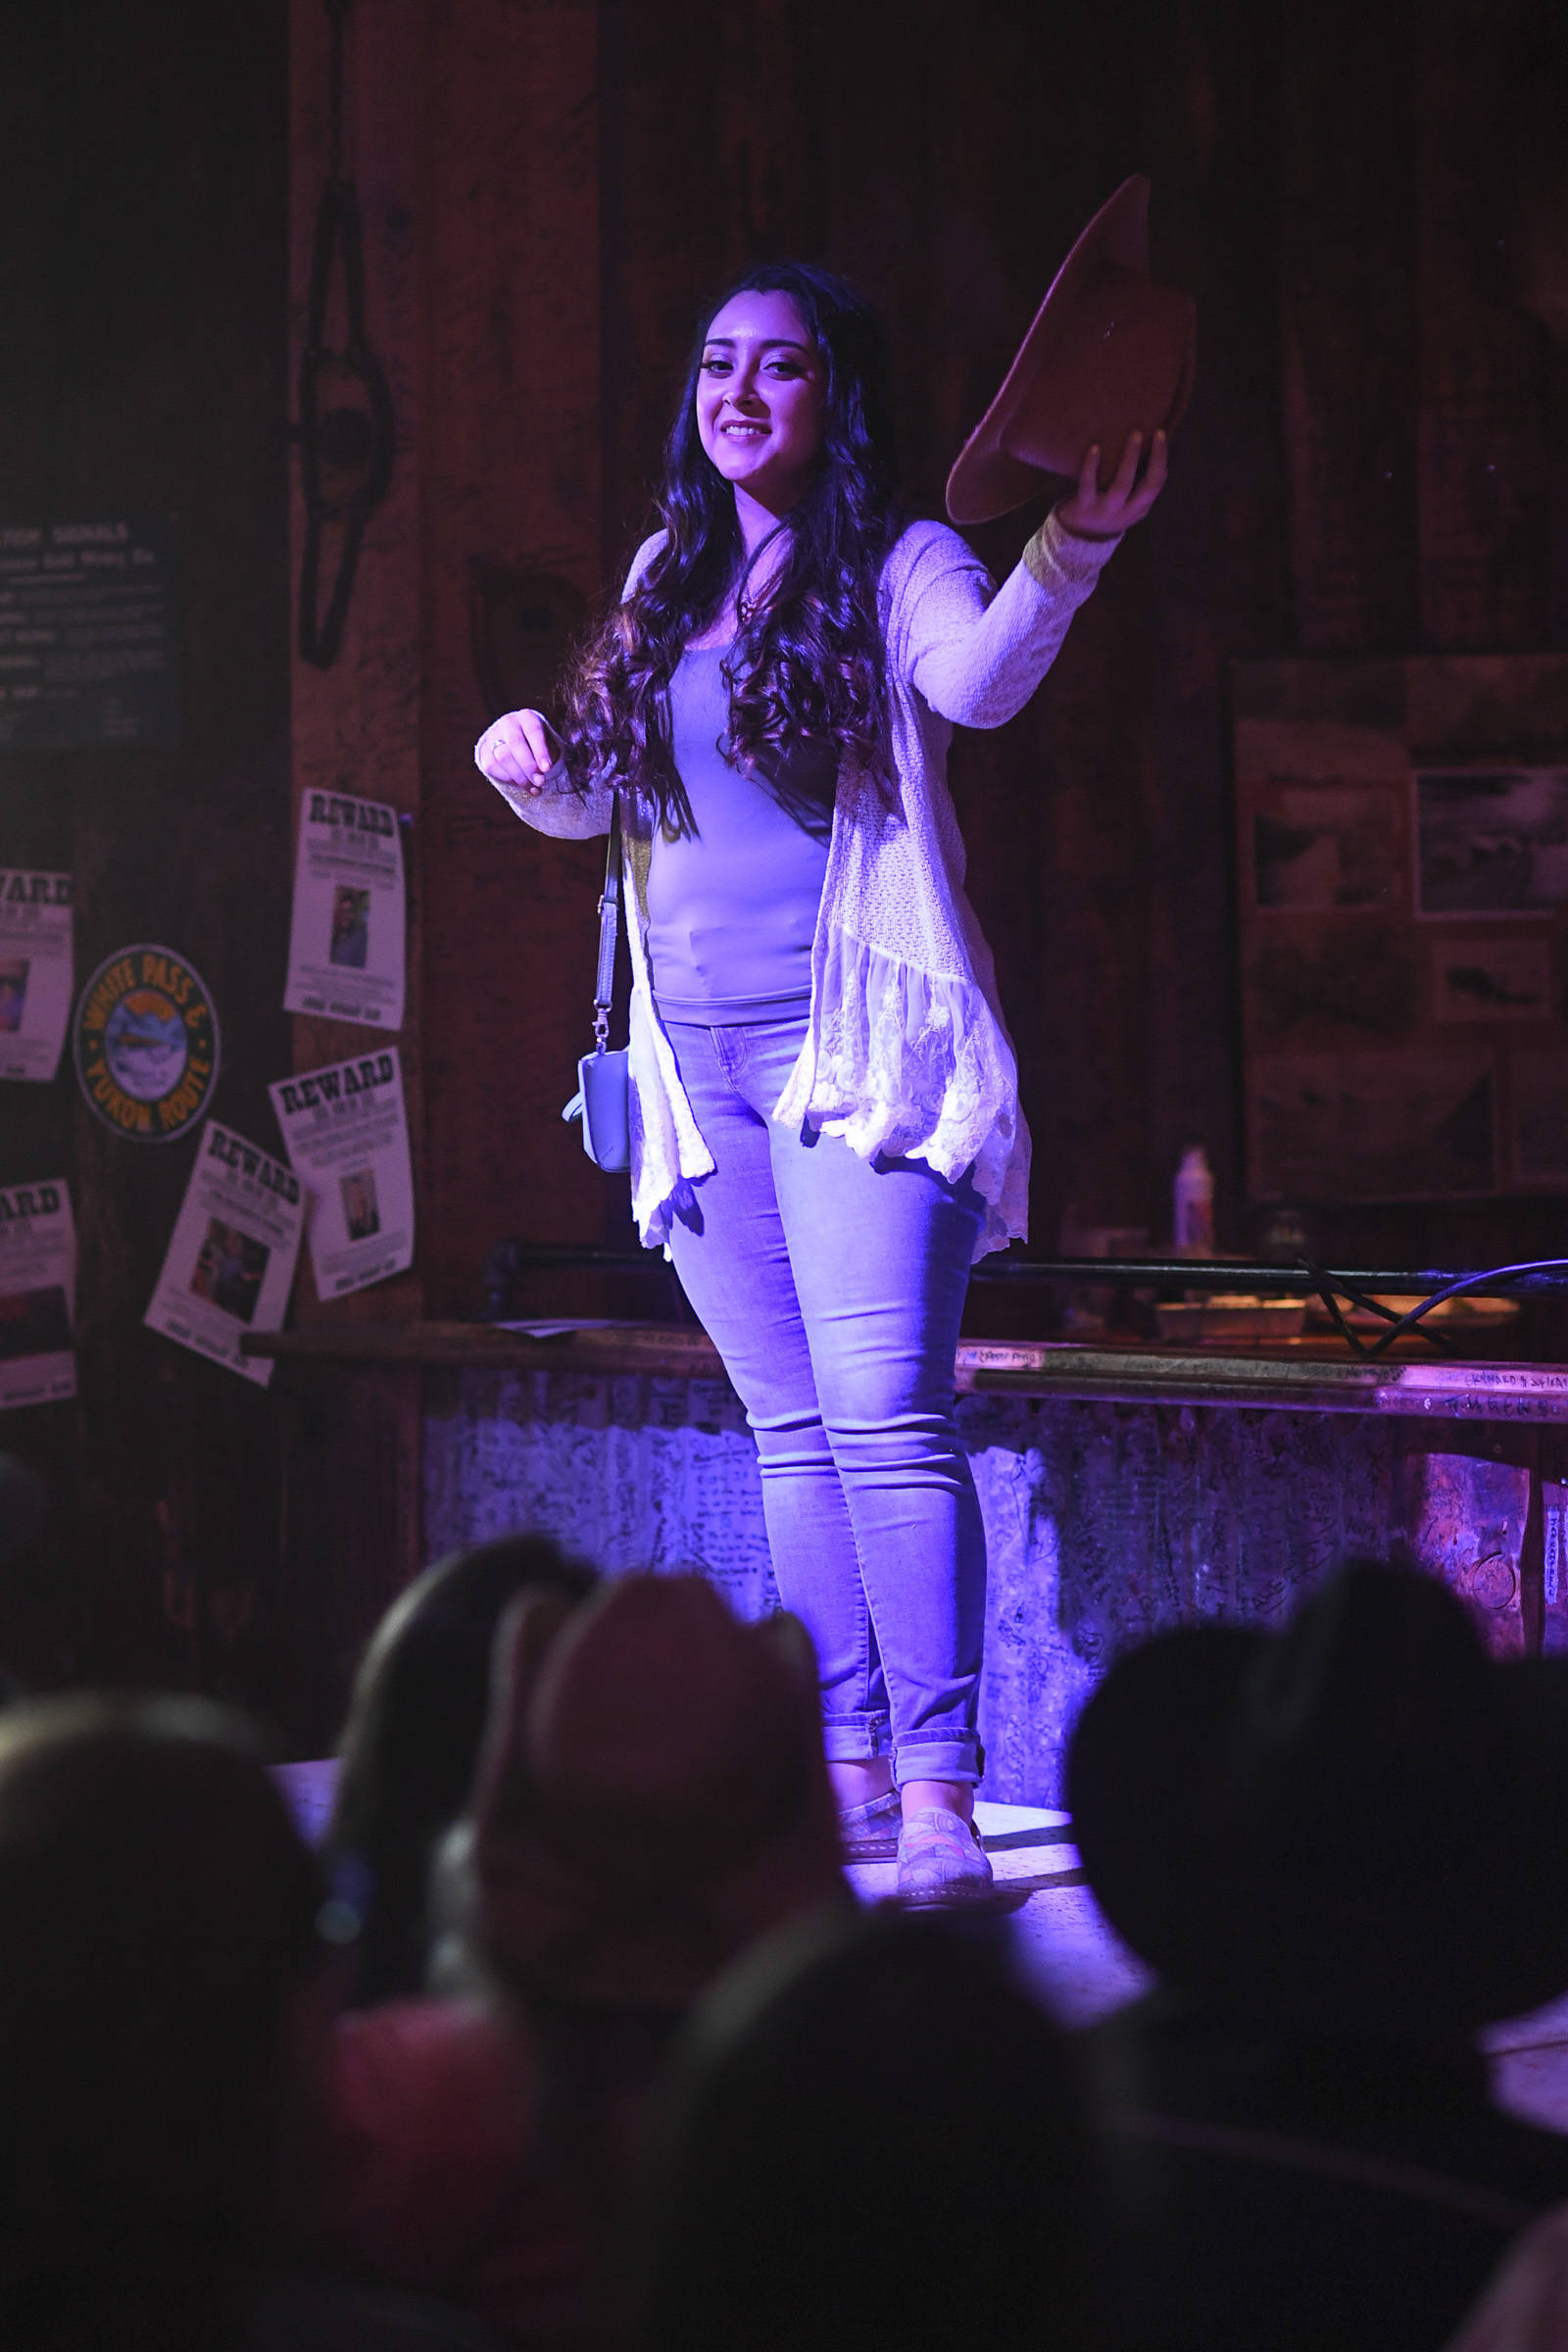 Women’s clothing from Alaskan Dames is modeled on stage during the Juneau Rotaract’s Wild West Roundup Fashion Show at the Red Dog Saloon on Saturday, April 27, 2019. (Michael Penn | Juneau Empire)